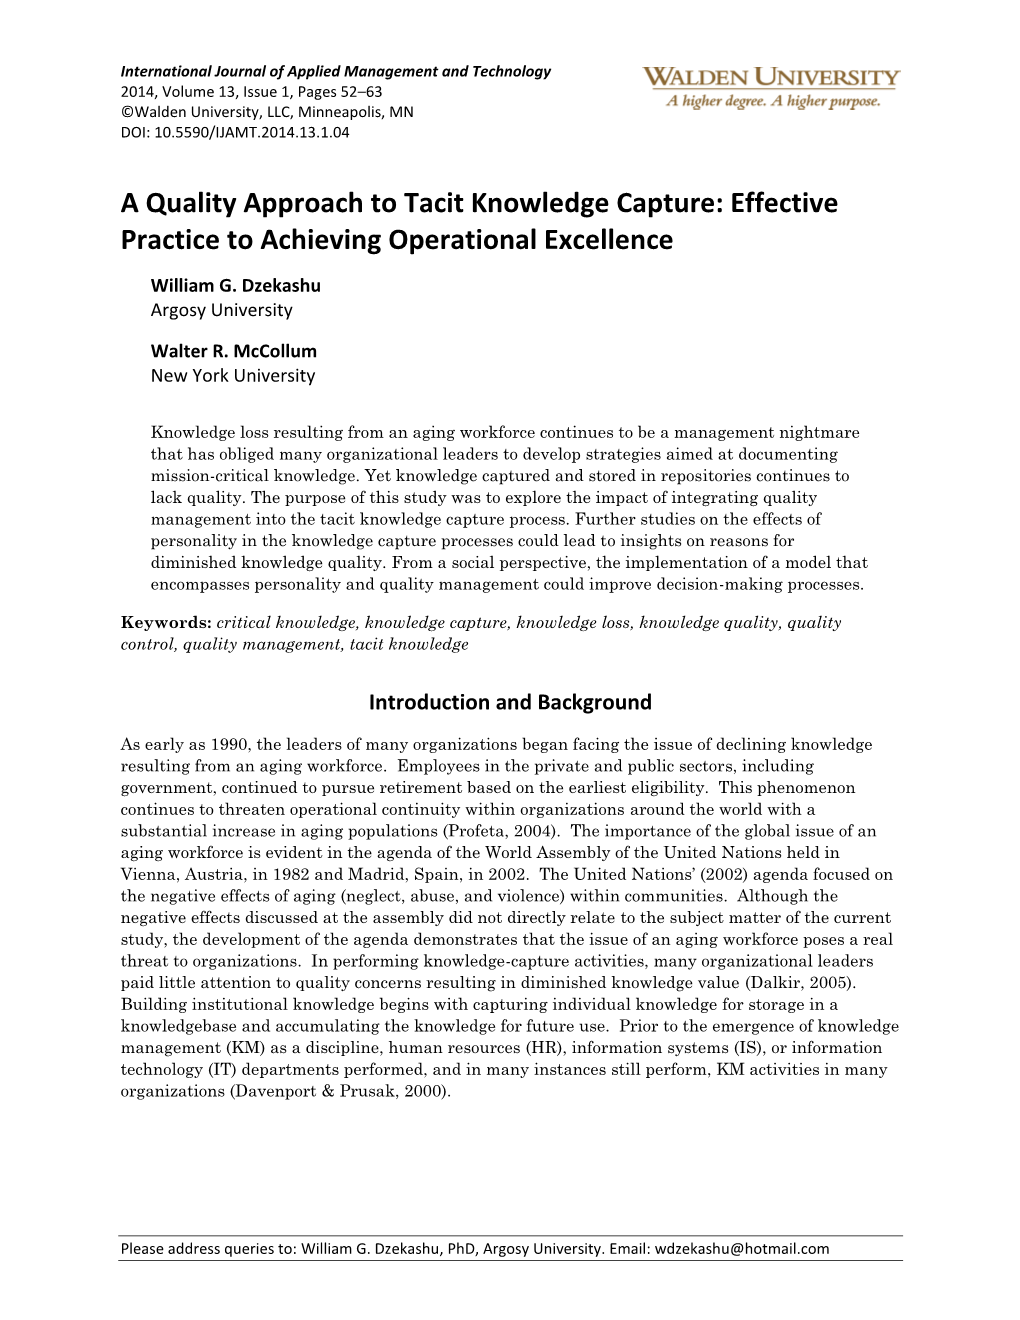 A Quality Approach to Tacit Knowledge Capture: Effective Practice to Achieving Operational Excellence